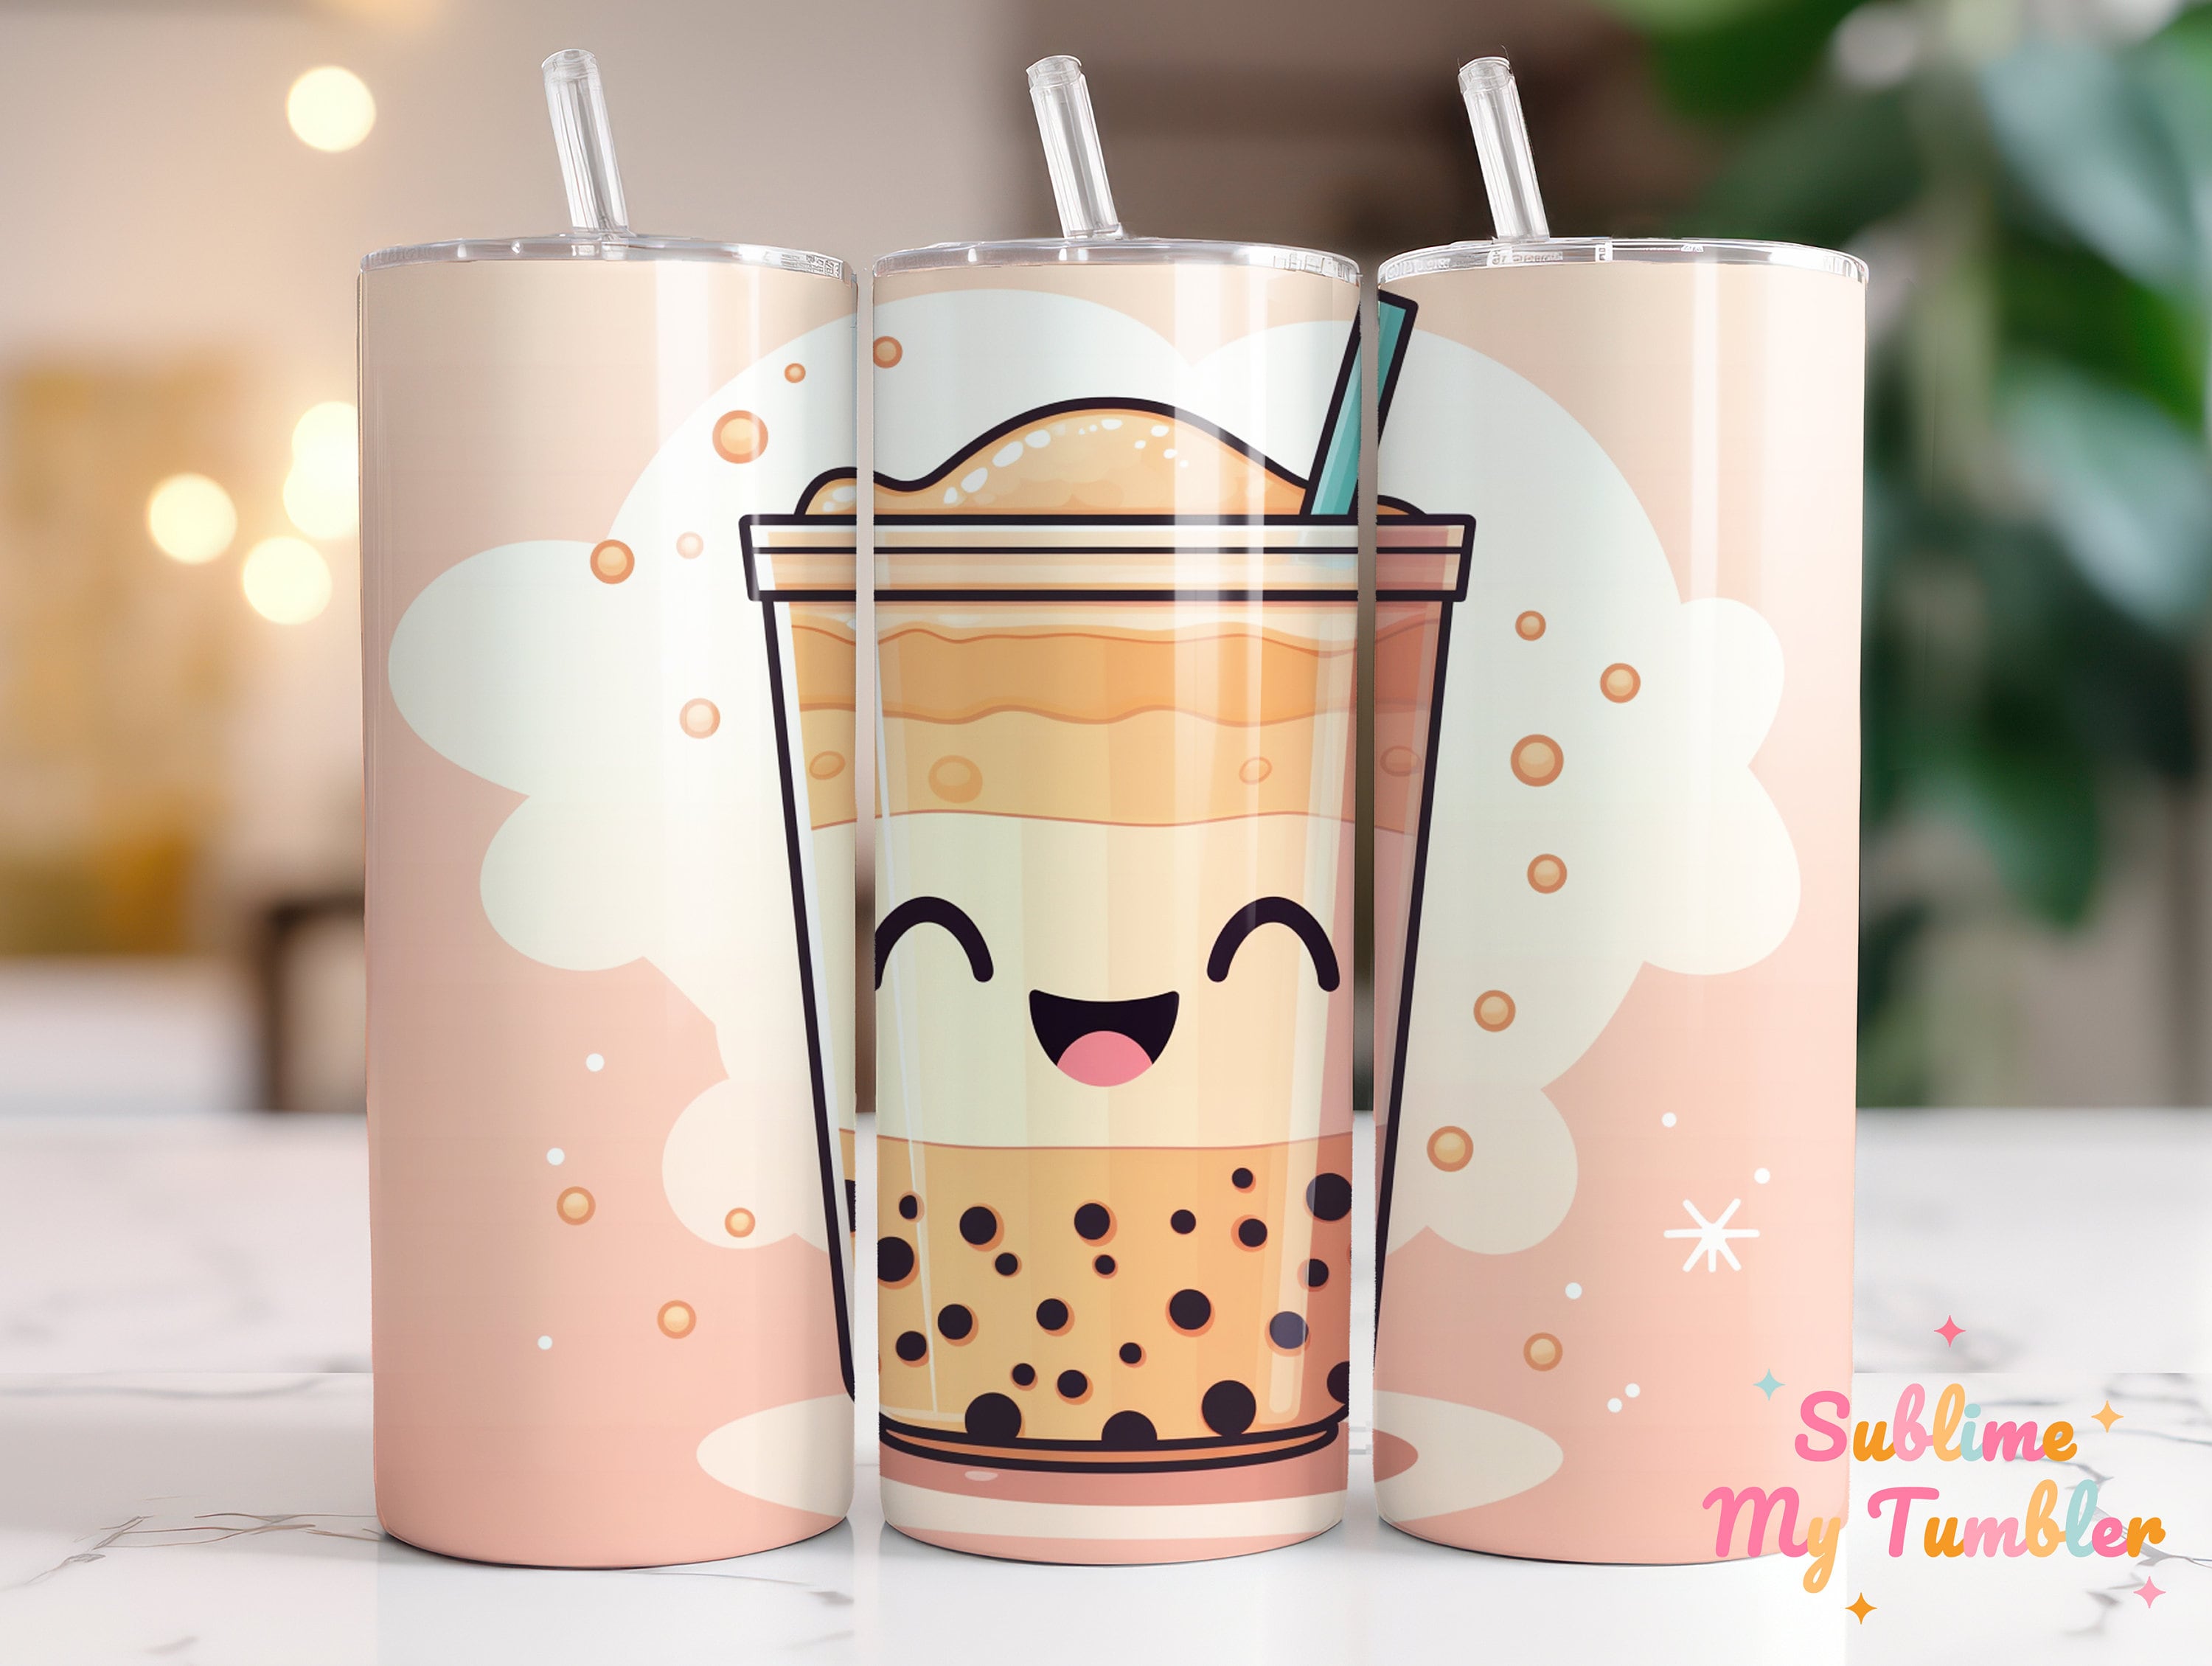 4 Pack Glass Cups with Lids and Straws, Reusable Bubble Tea Cup 24oz Boba  Cup Travel Mason Jar Cups Tumbler Glass for Soda Smoothie Iced Coffee Large  Pearl Juice 